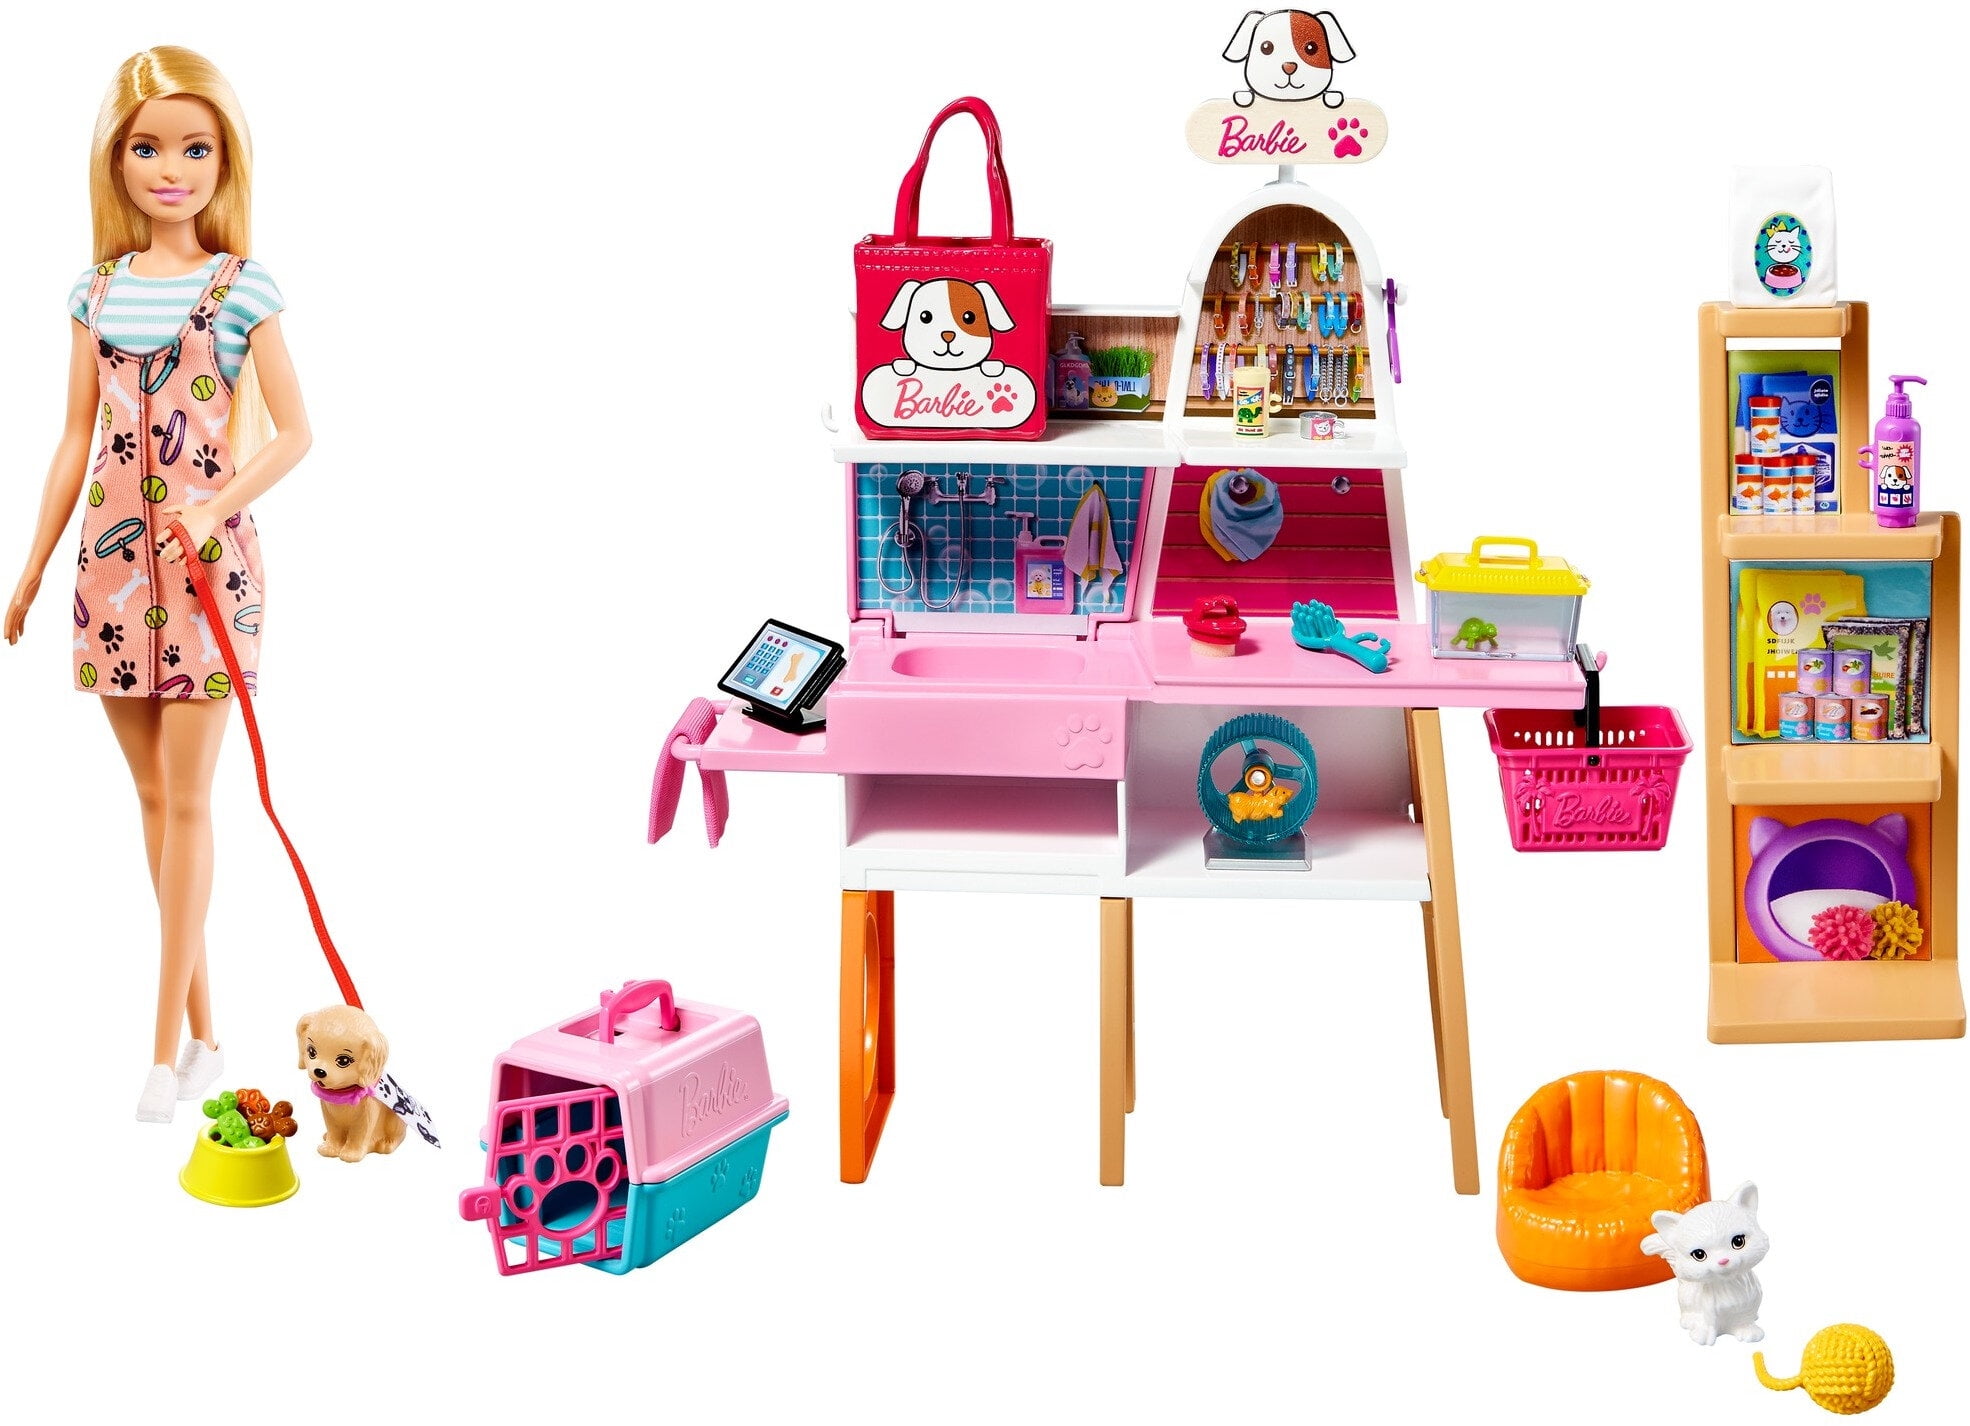 Barbie Doll Play Mobile Phones and Laptop Computer play accessory 